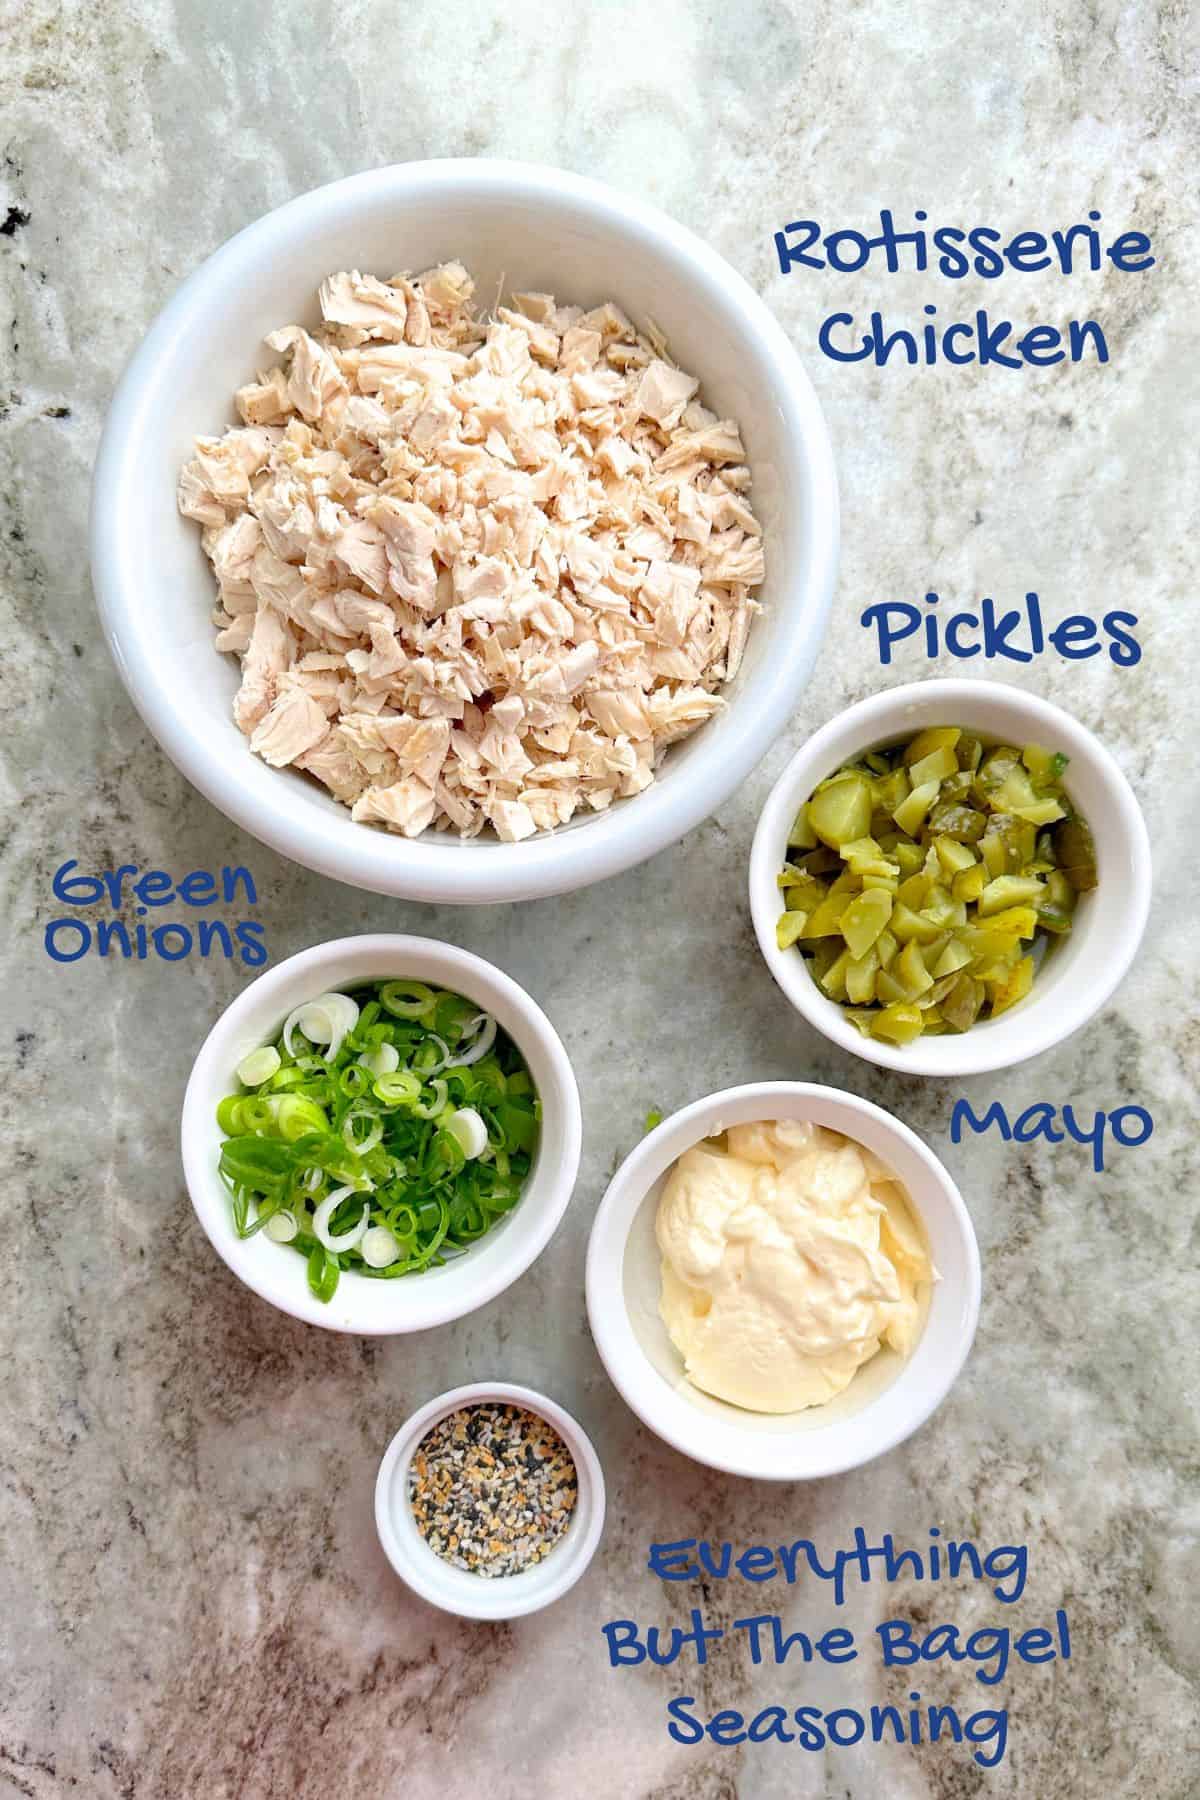 ingredients used for the chicken salad.